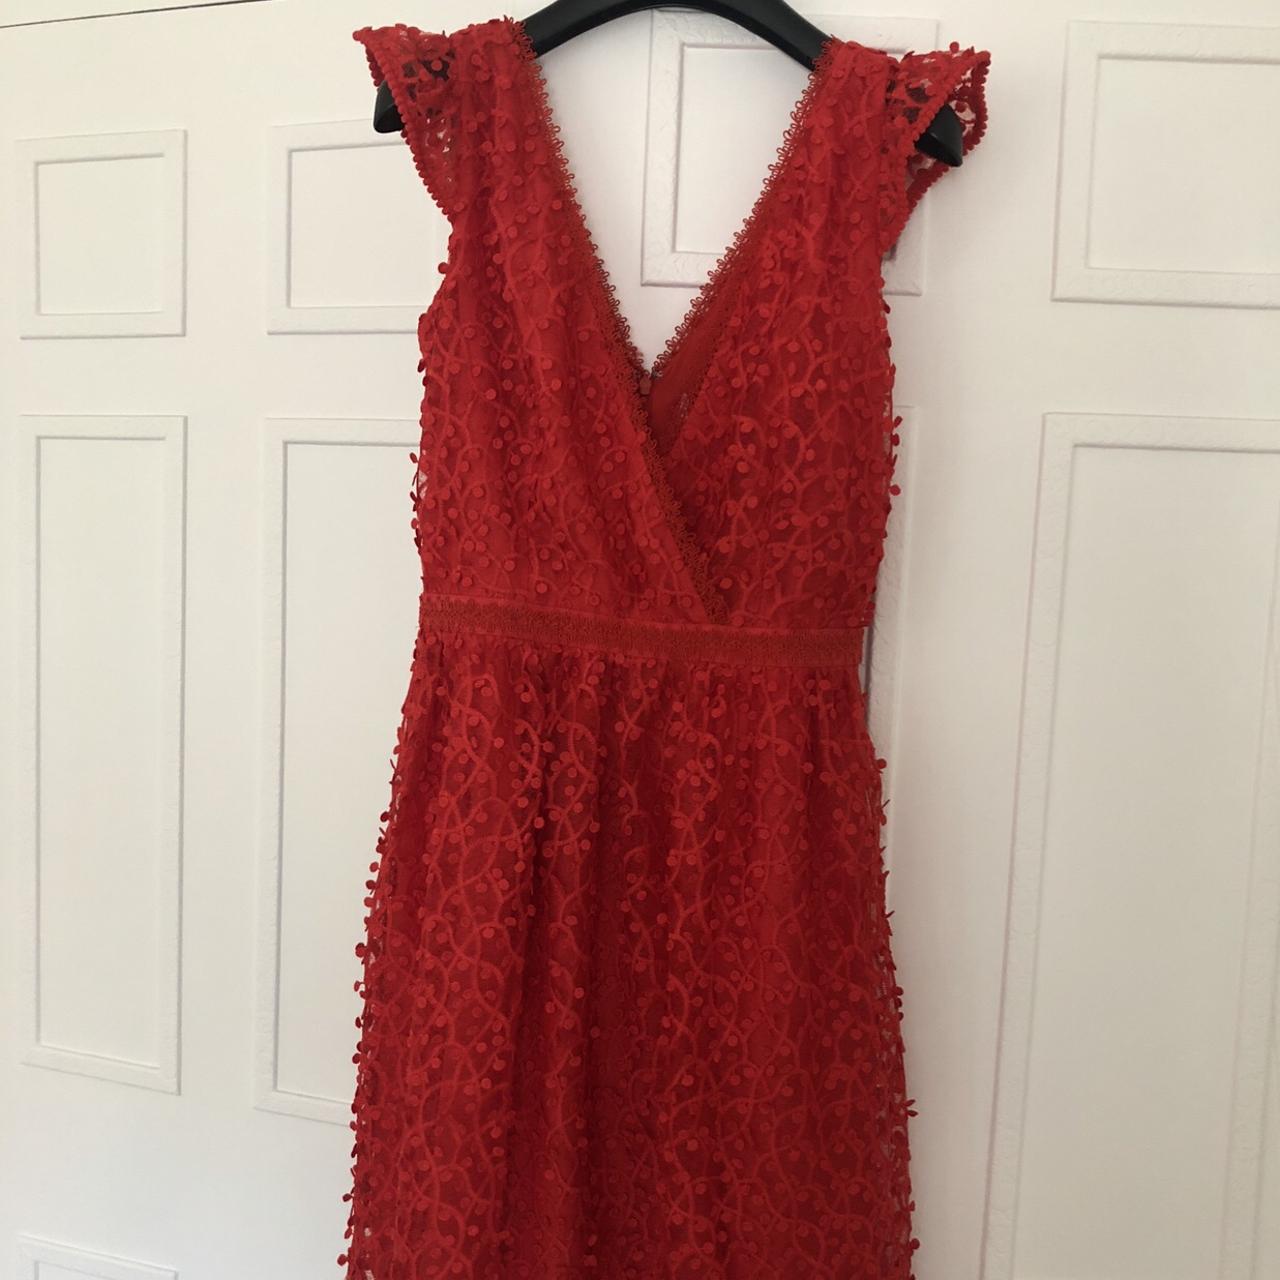 Stunning Reiss Red Dress Size 8 - sold out. Bought... - Depop